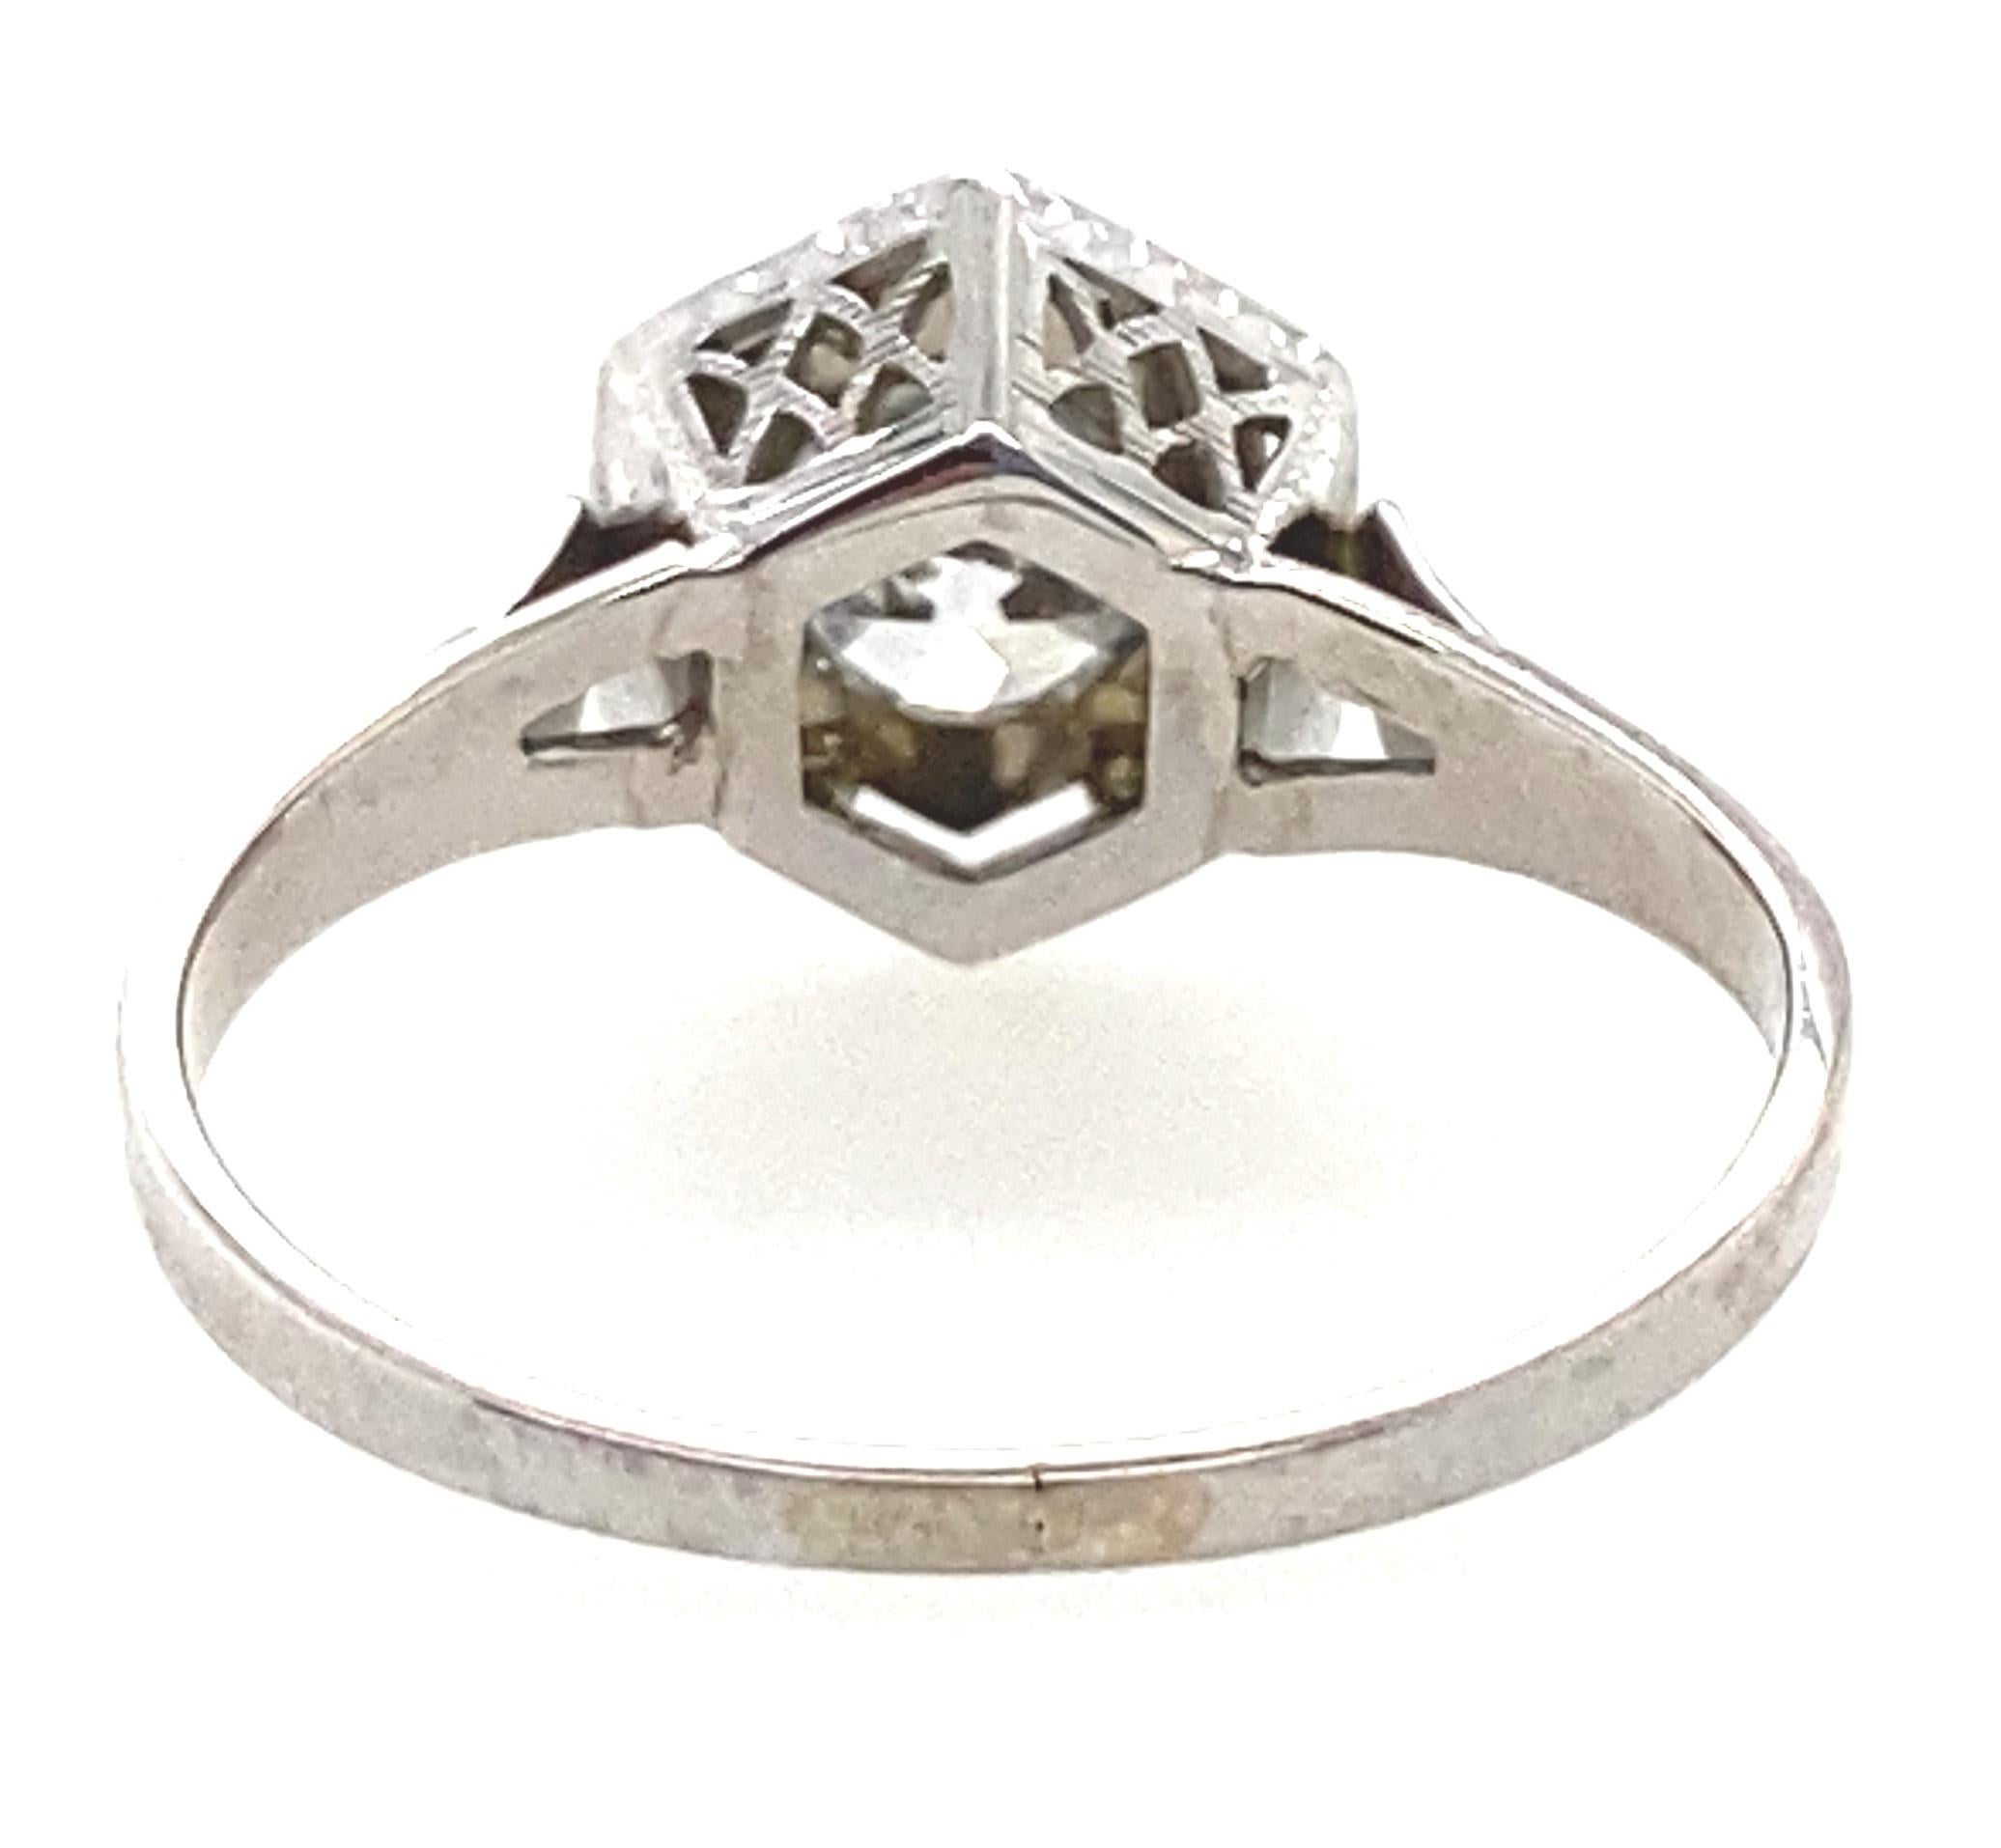 20k White Gold Old European Cut Diamond Art Deco Ring In Good Condition For Sale In Towson, MD